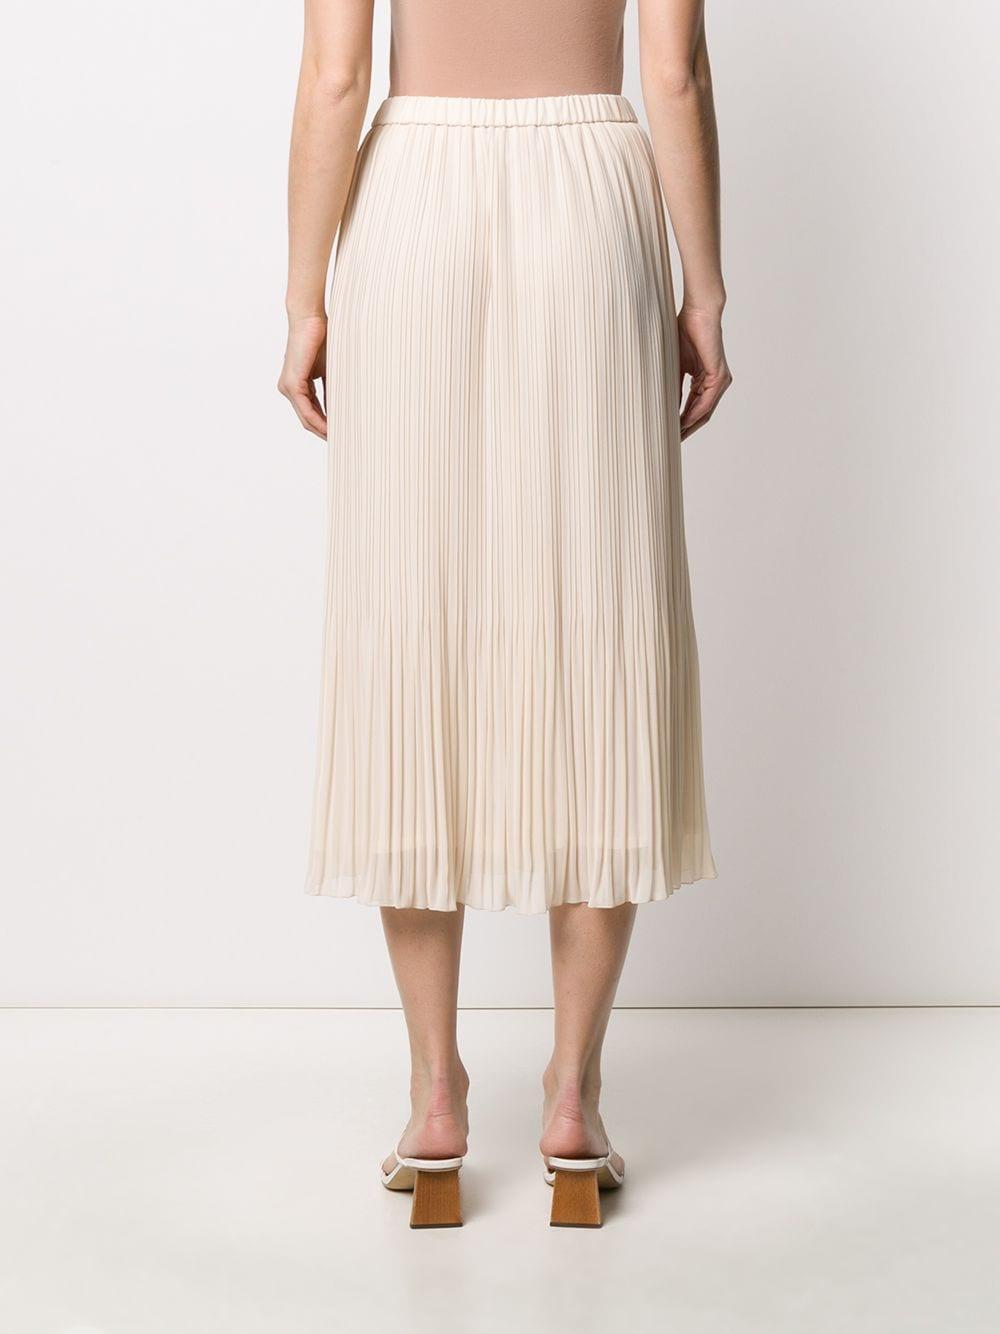 Peserico Gonna Pleated Skirt in Natural - Lyst